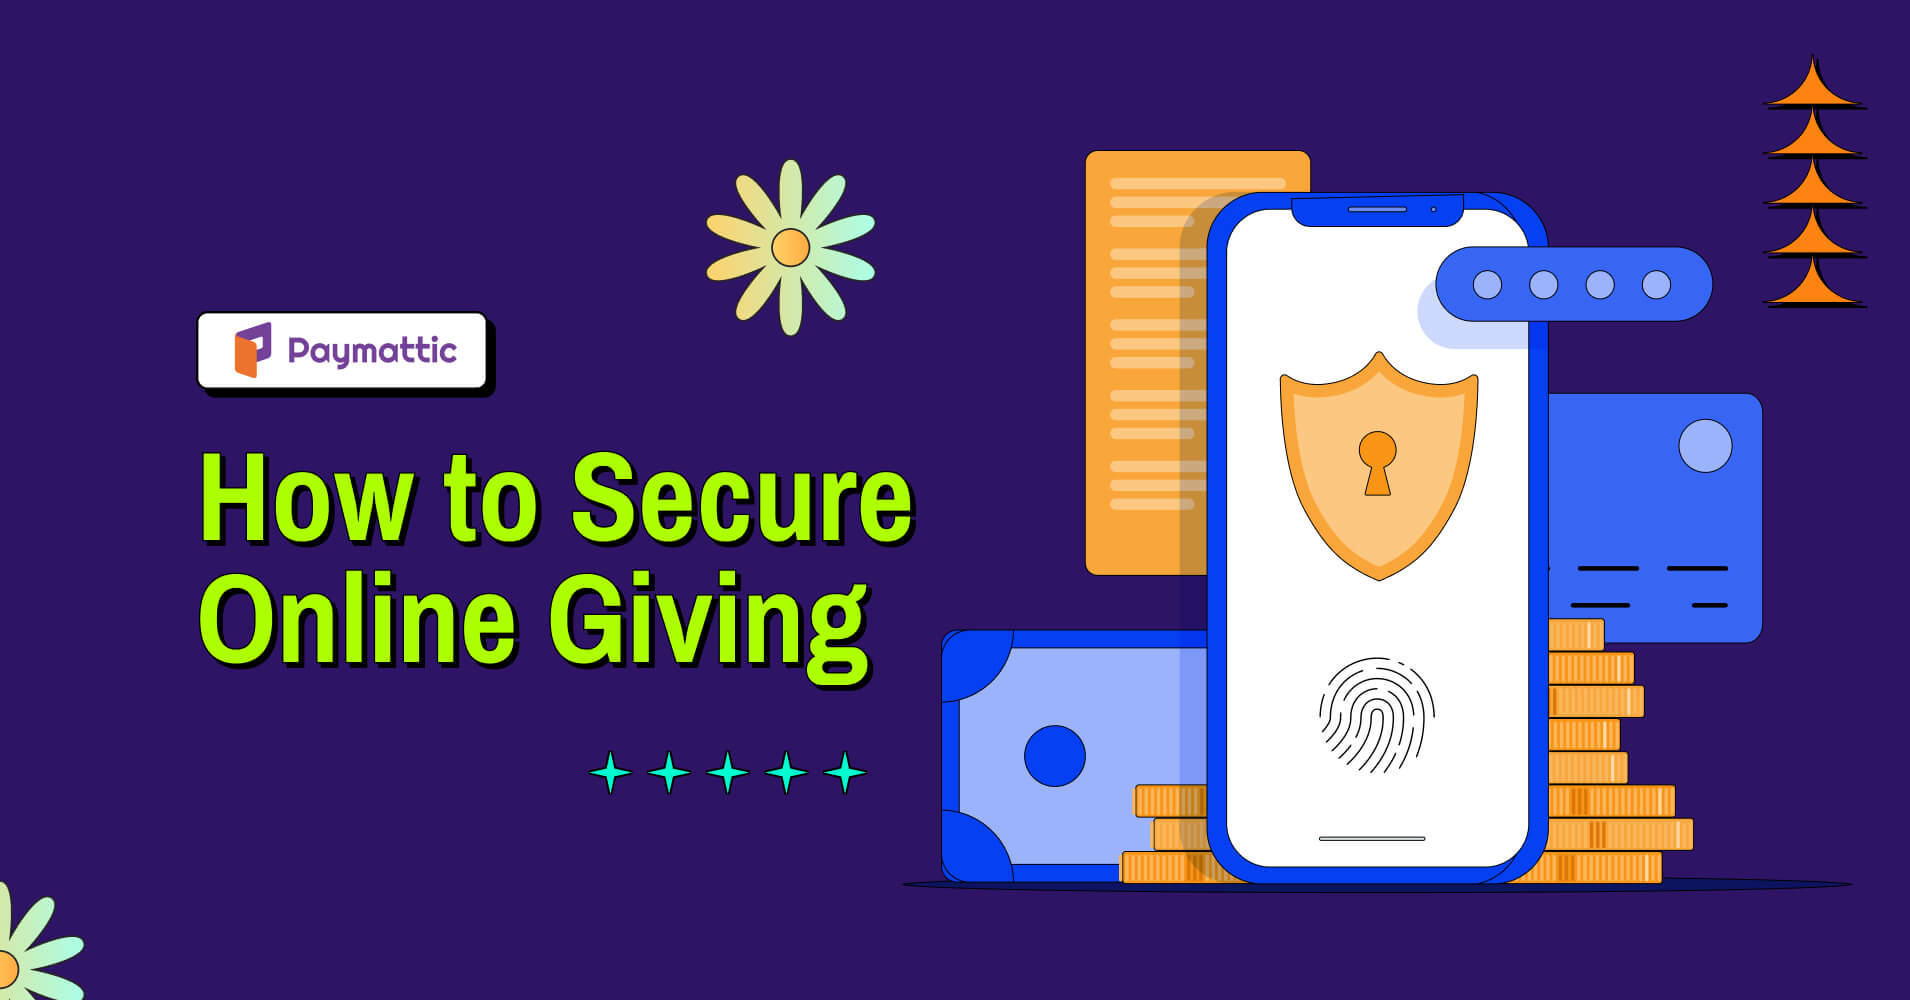 How to Secure Online Giving – Protect Your Donations